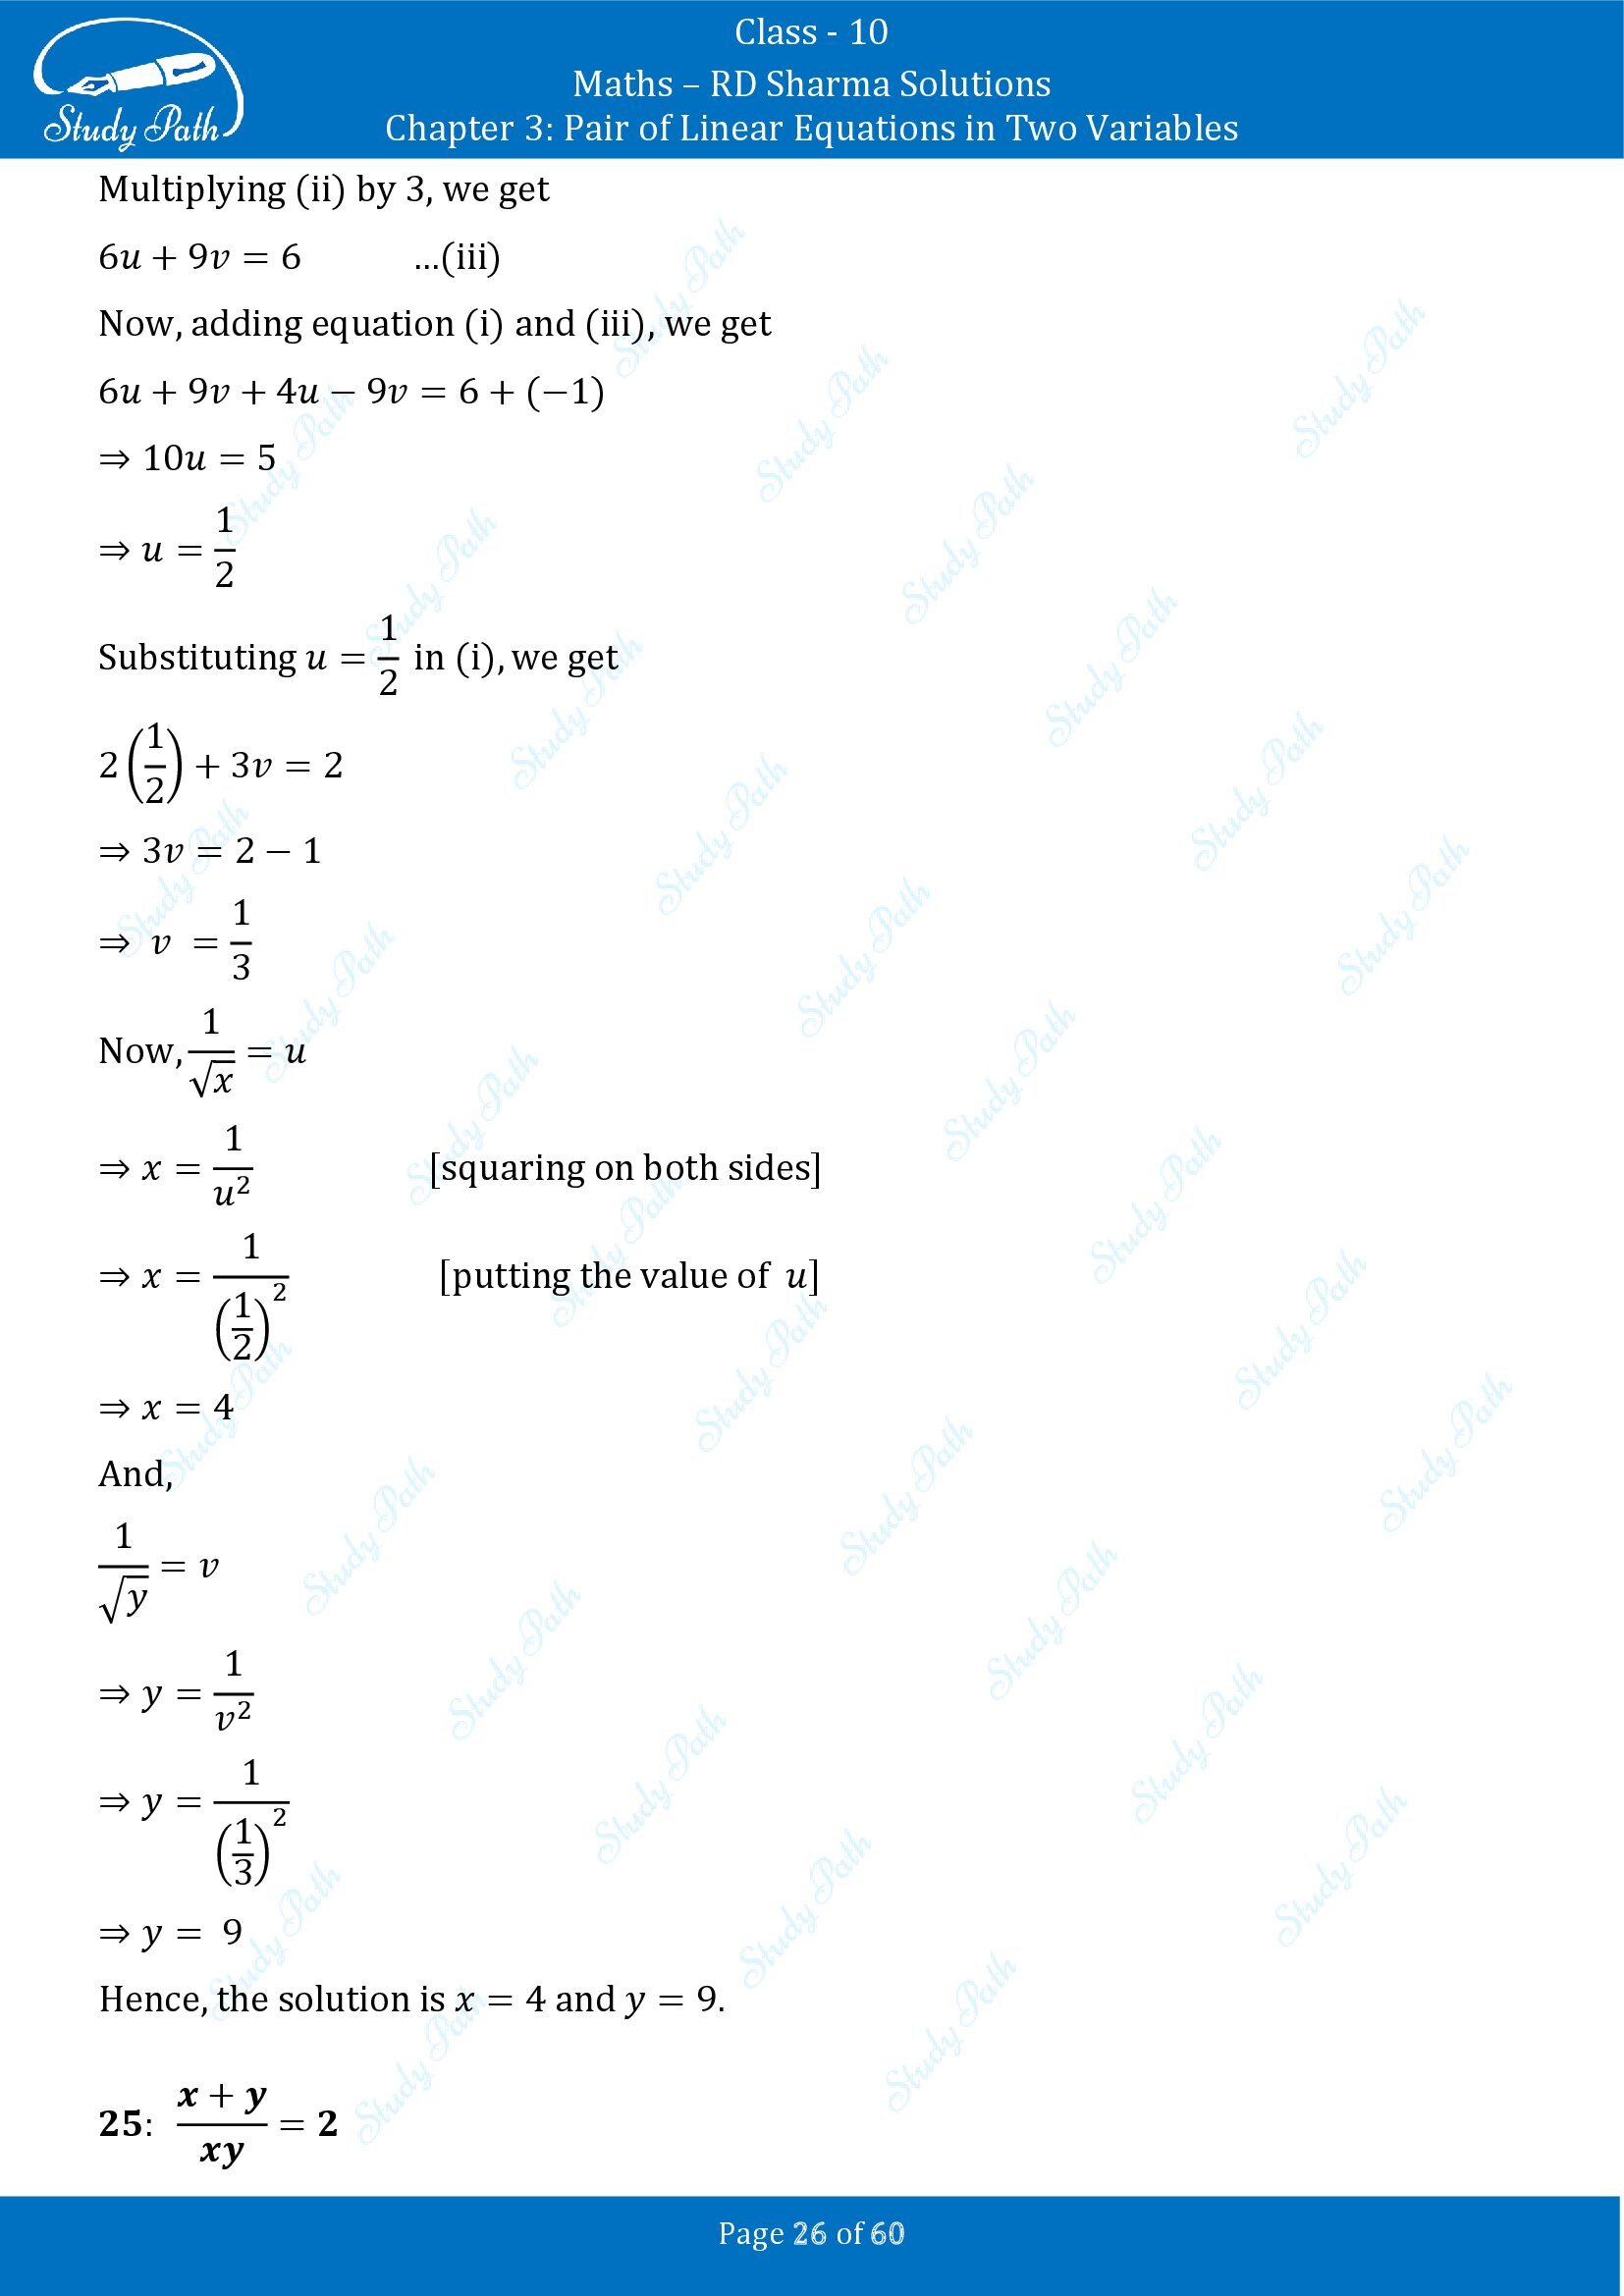 RD Sharma Solutions Class 10 Chapter 3 Pair of Linear Equations in Two Variables Exercise 3.3 00026